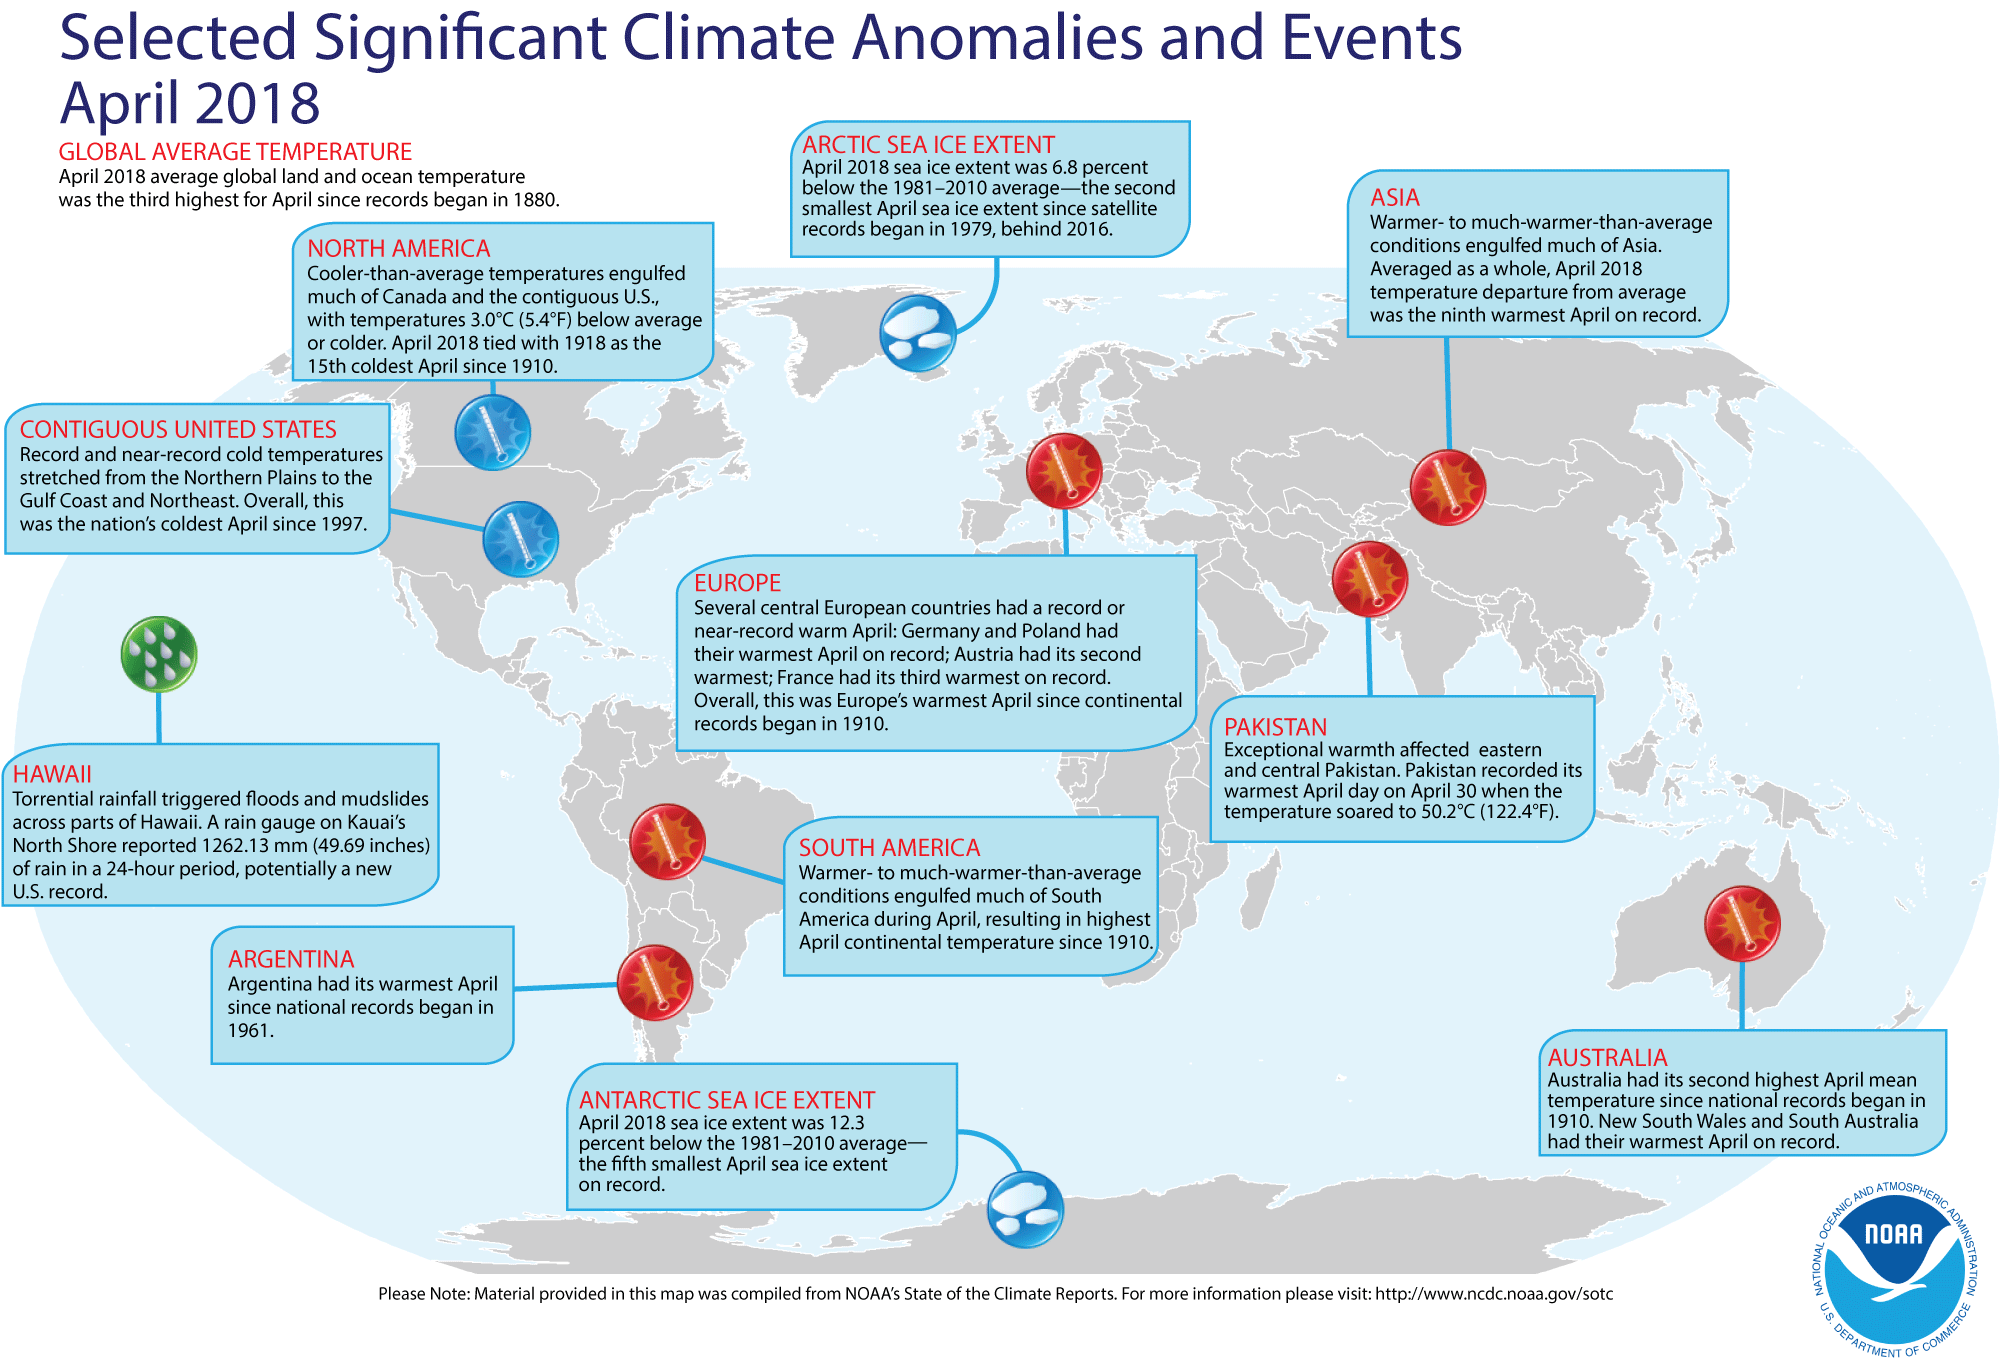 An annotated map of the world showing notable climate events that occurred during April 2018. For details, see bulleted list below in our story and also visit https://www.ncdc.noaa.gov/sotc/global/201804.